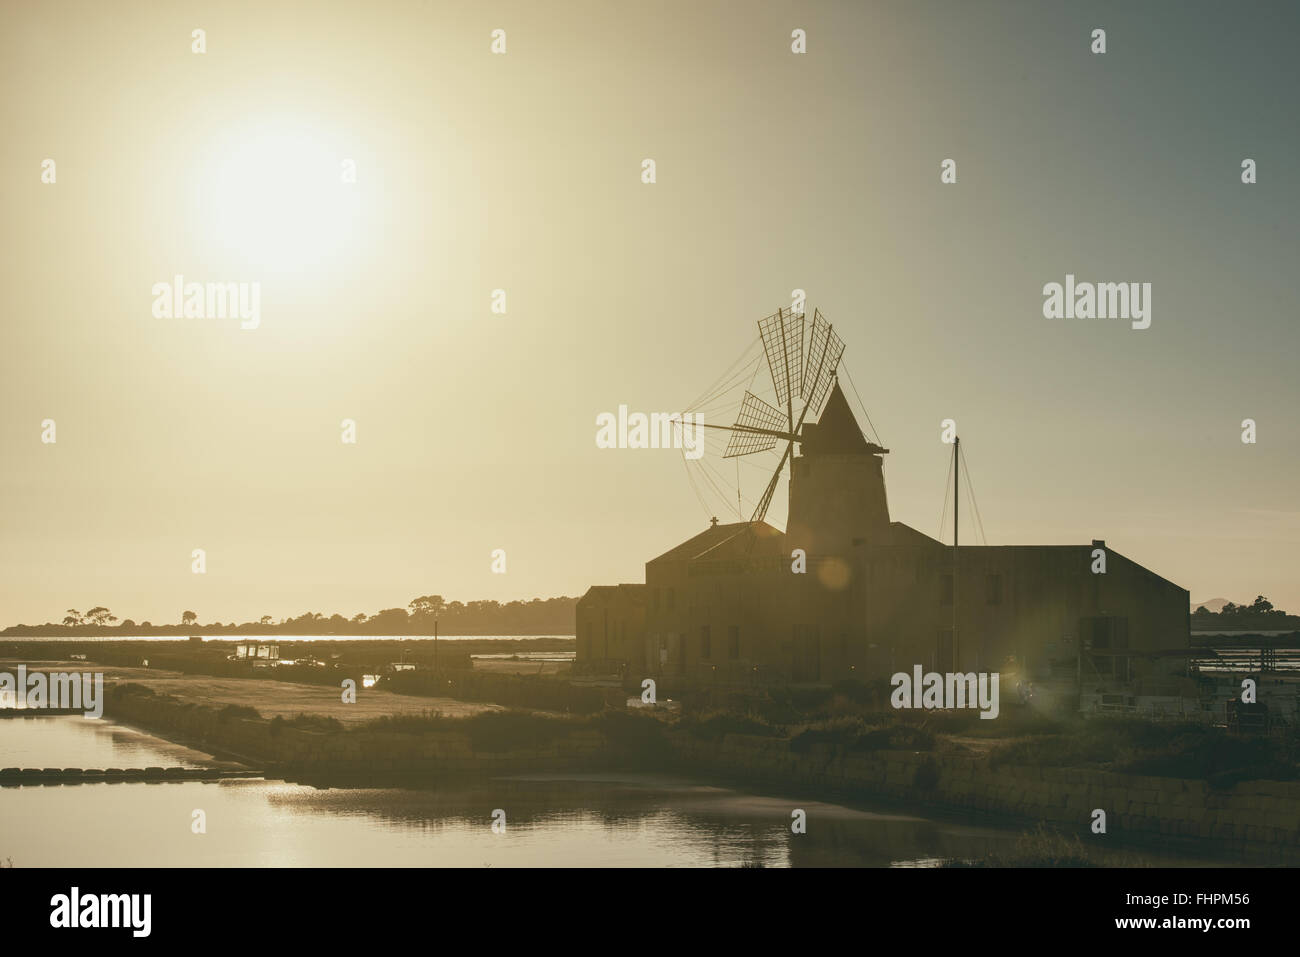 Pans of Trapani with windmills, in Sicily Stock Photo